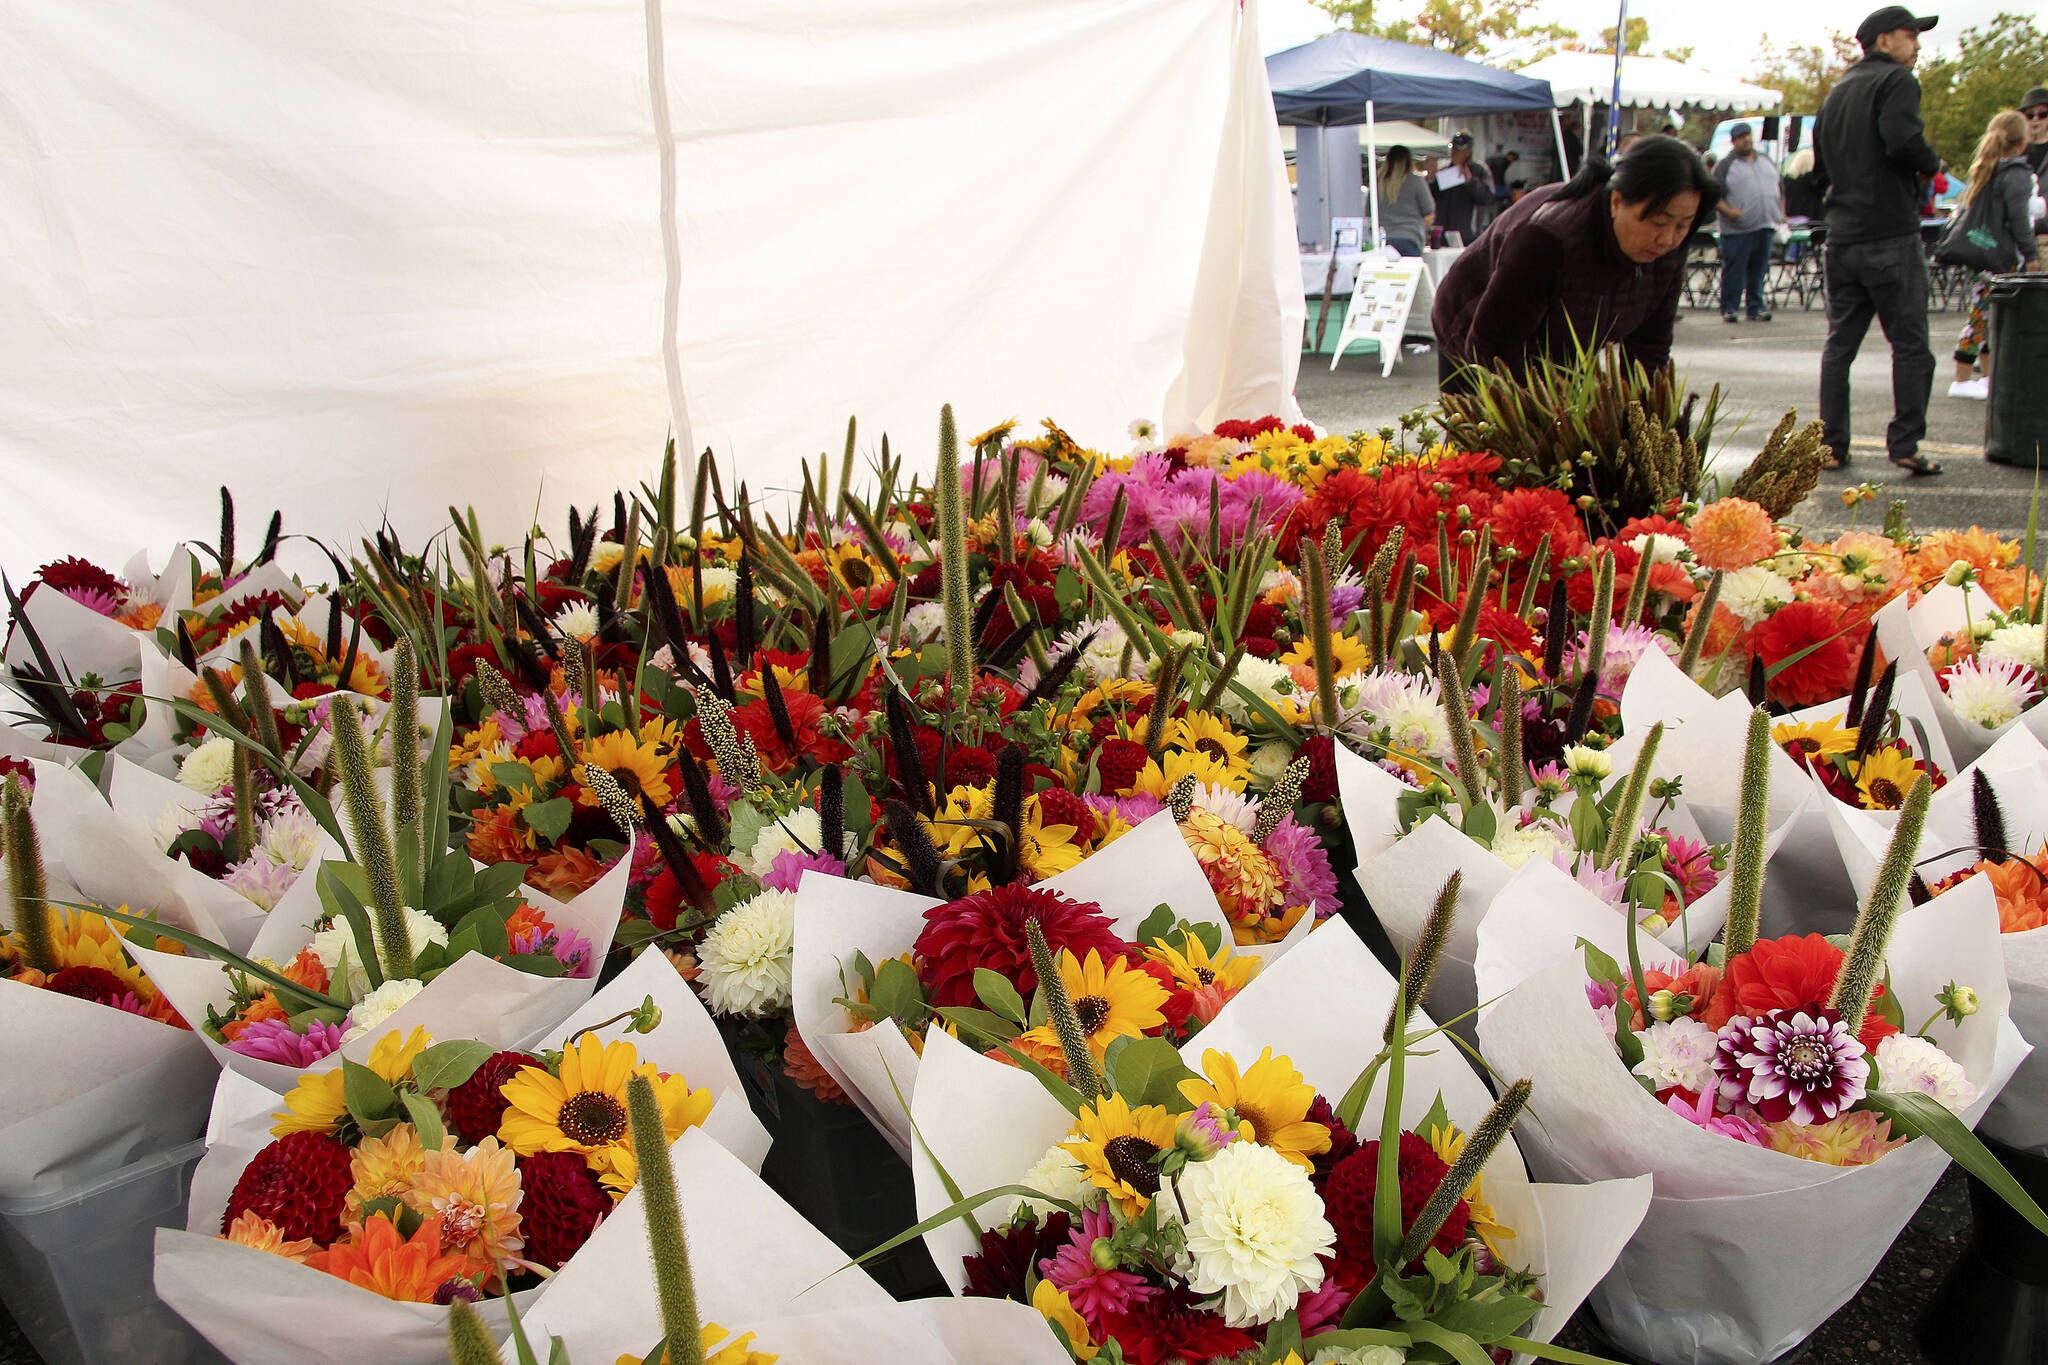 Flowers at the farmers market in 2019. Olivia Sullivan/the Mirror